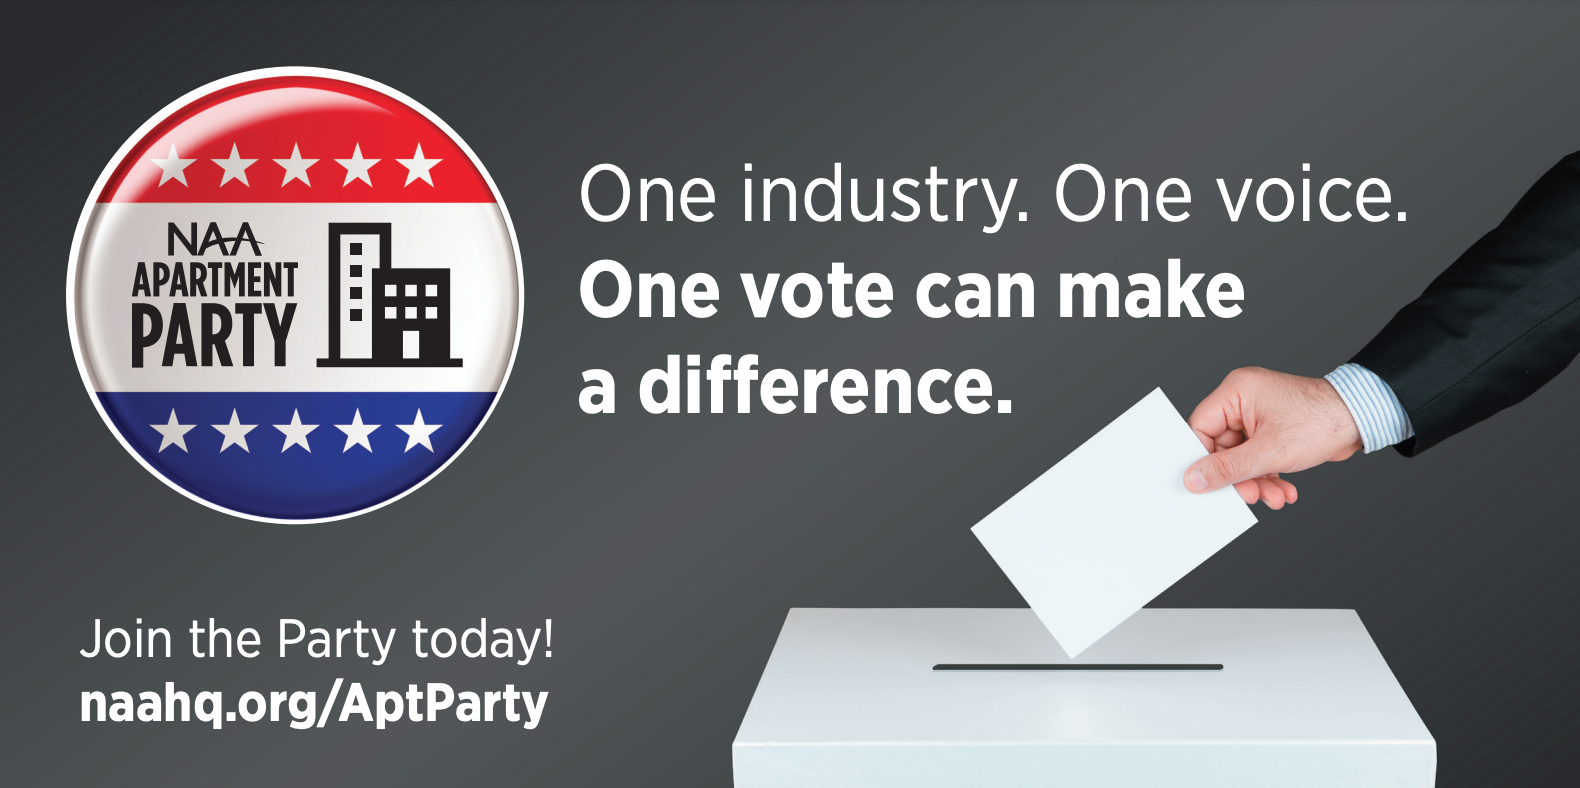 NAA Apartment Party graphic: says "one industry. one voice. one vote can make a difference. join the party today!"